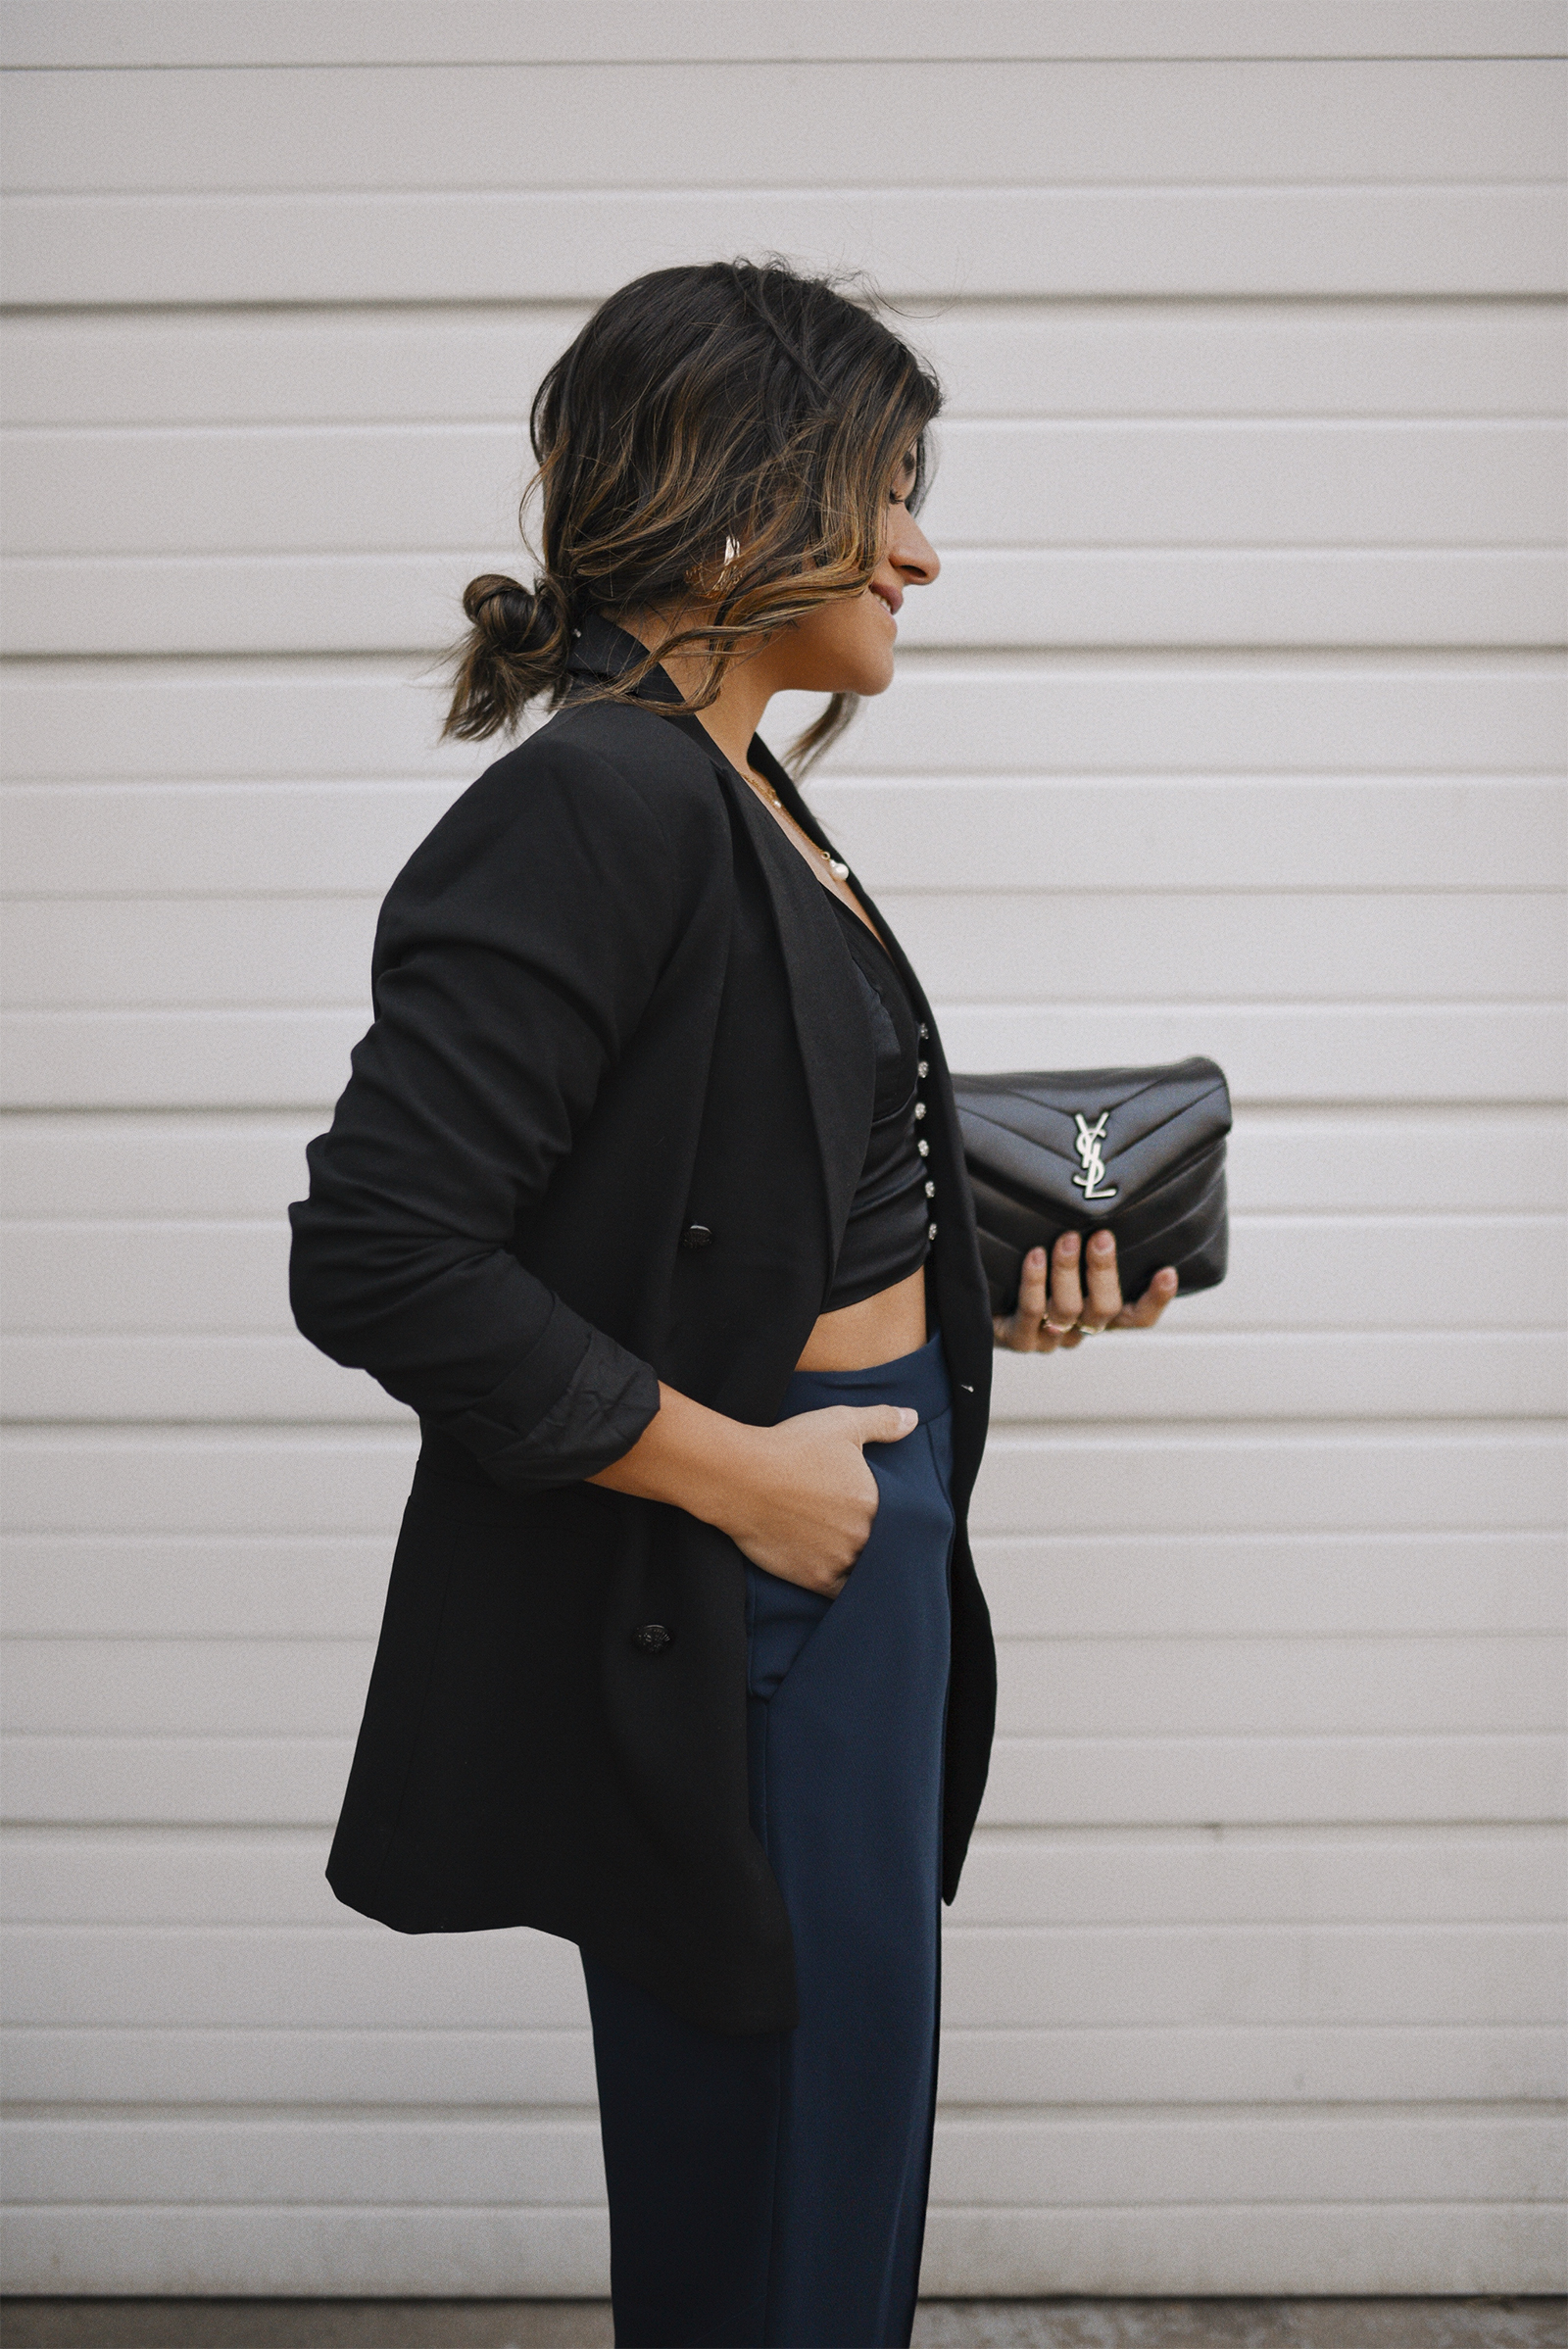 A CHIC WAY TO STYLE BLACK AND NAVY BLUE TOGETHER